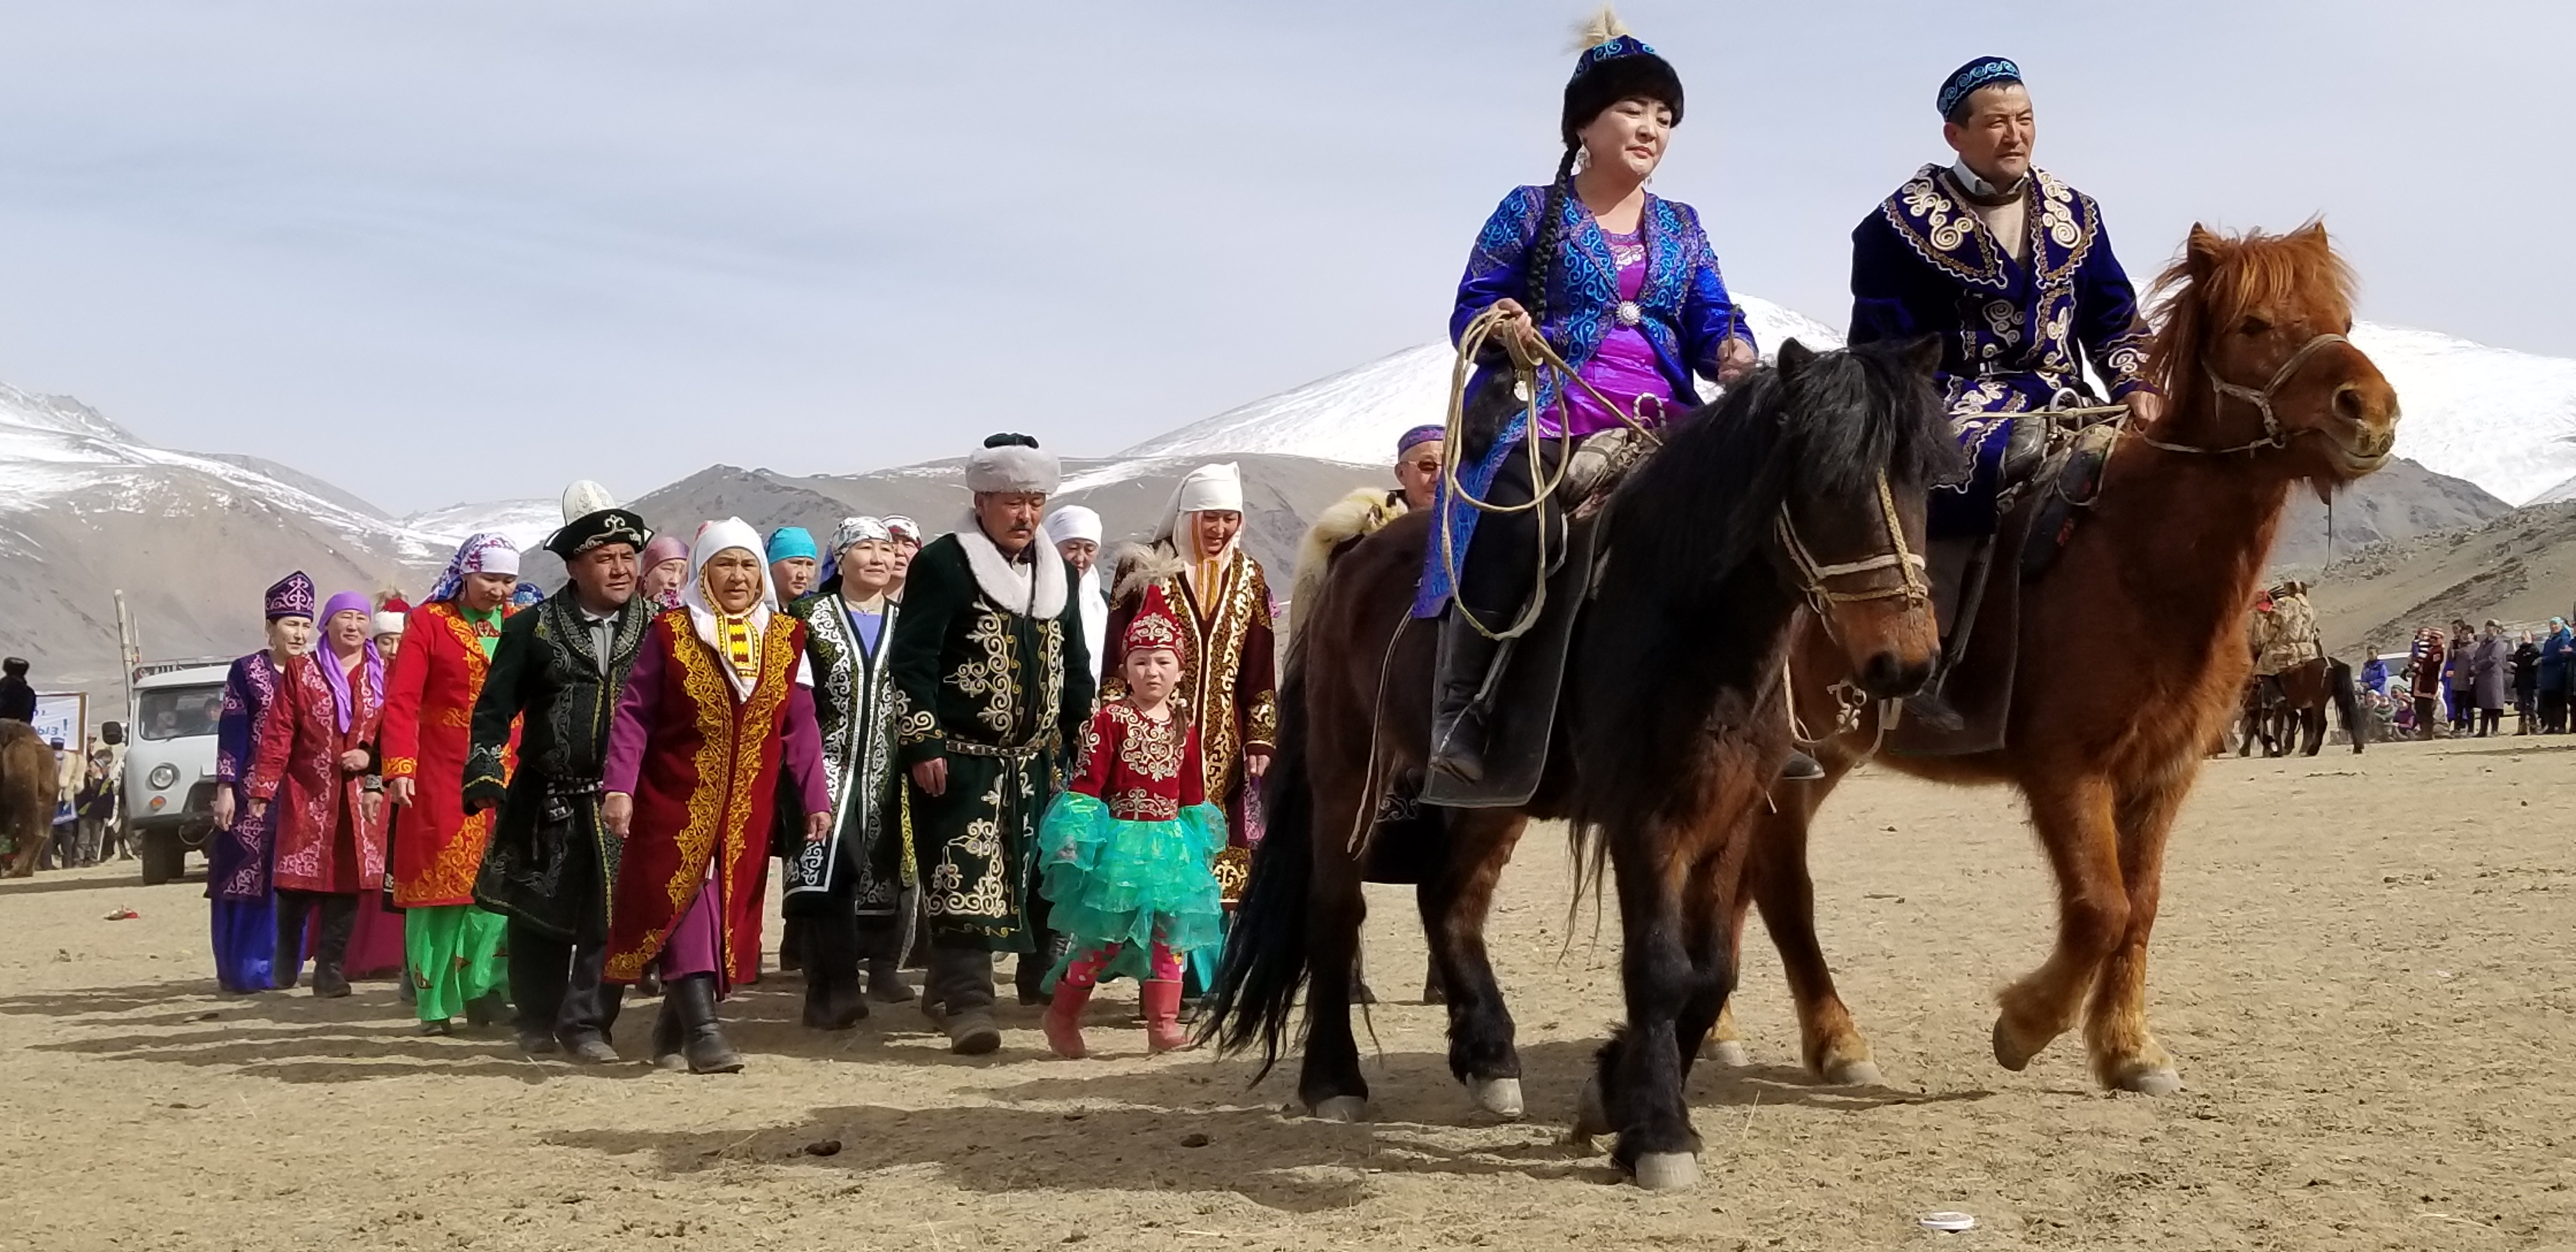 Community parade during the Nauryz Festival In Mongolia